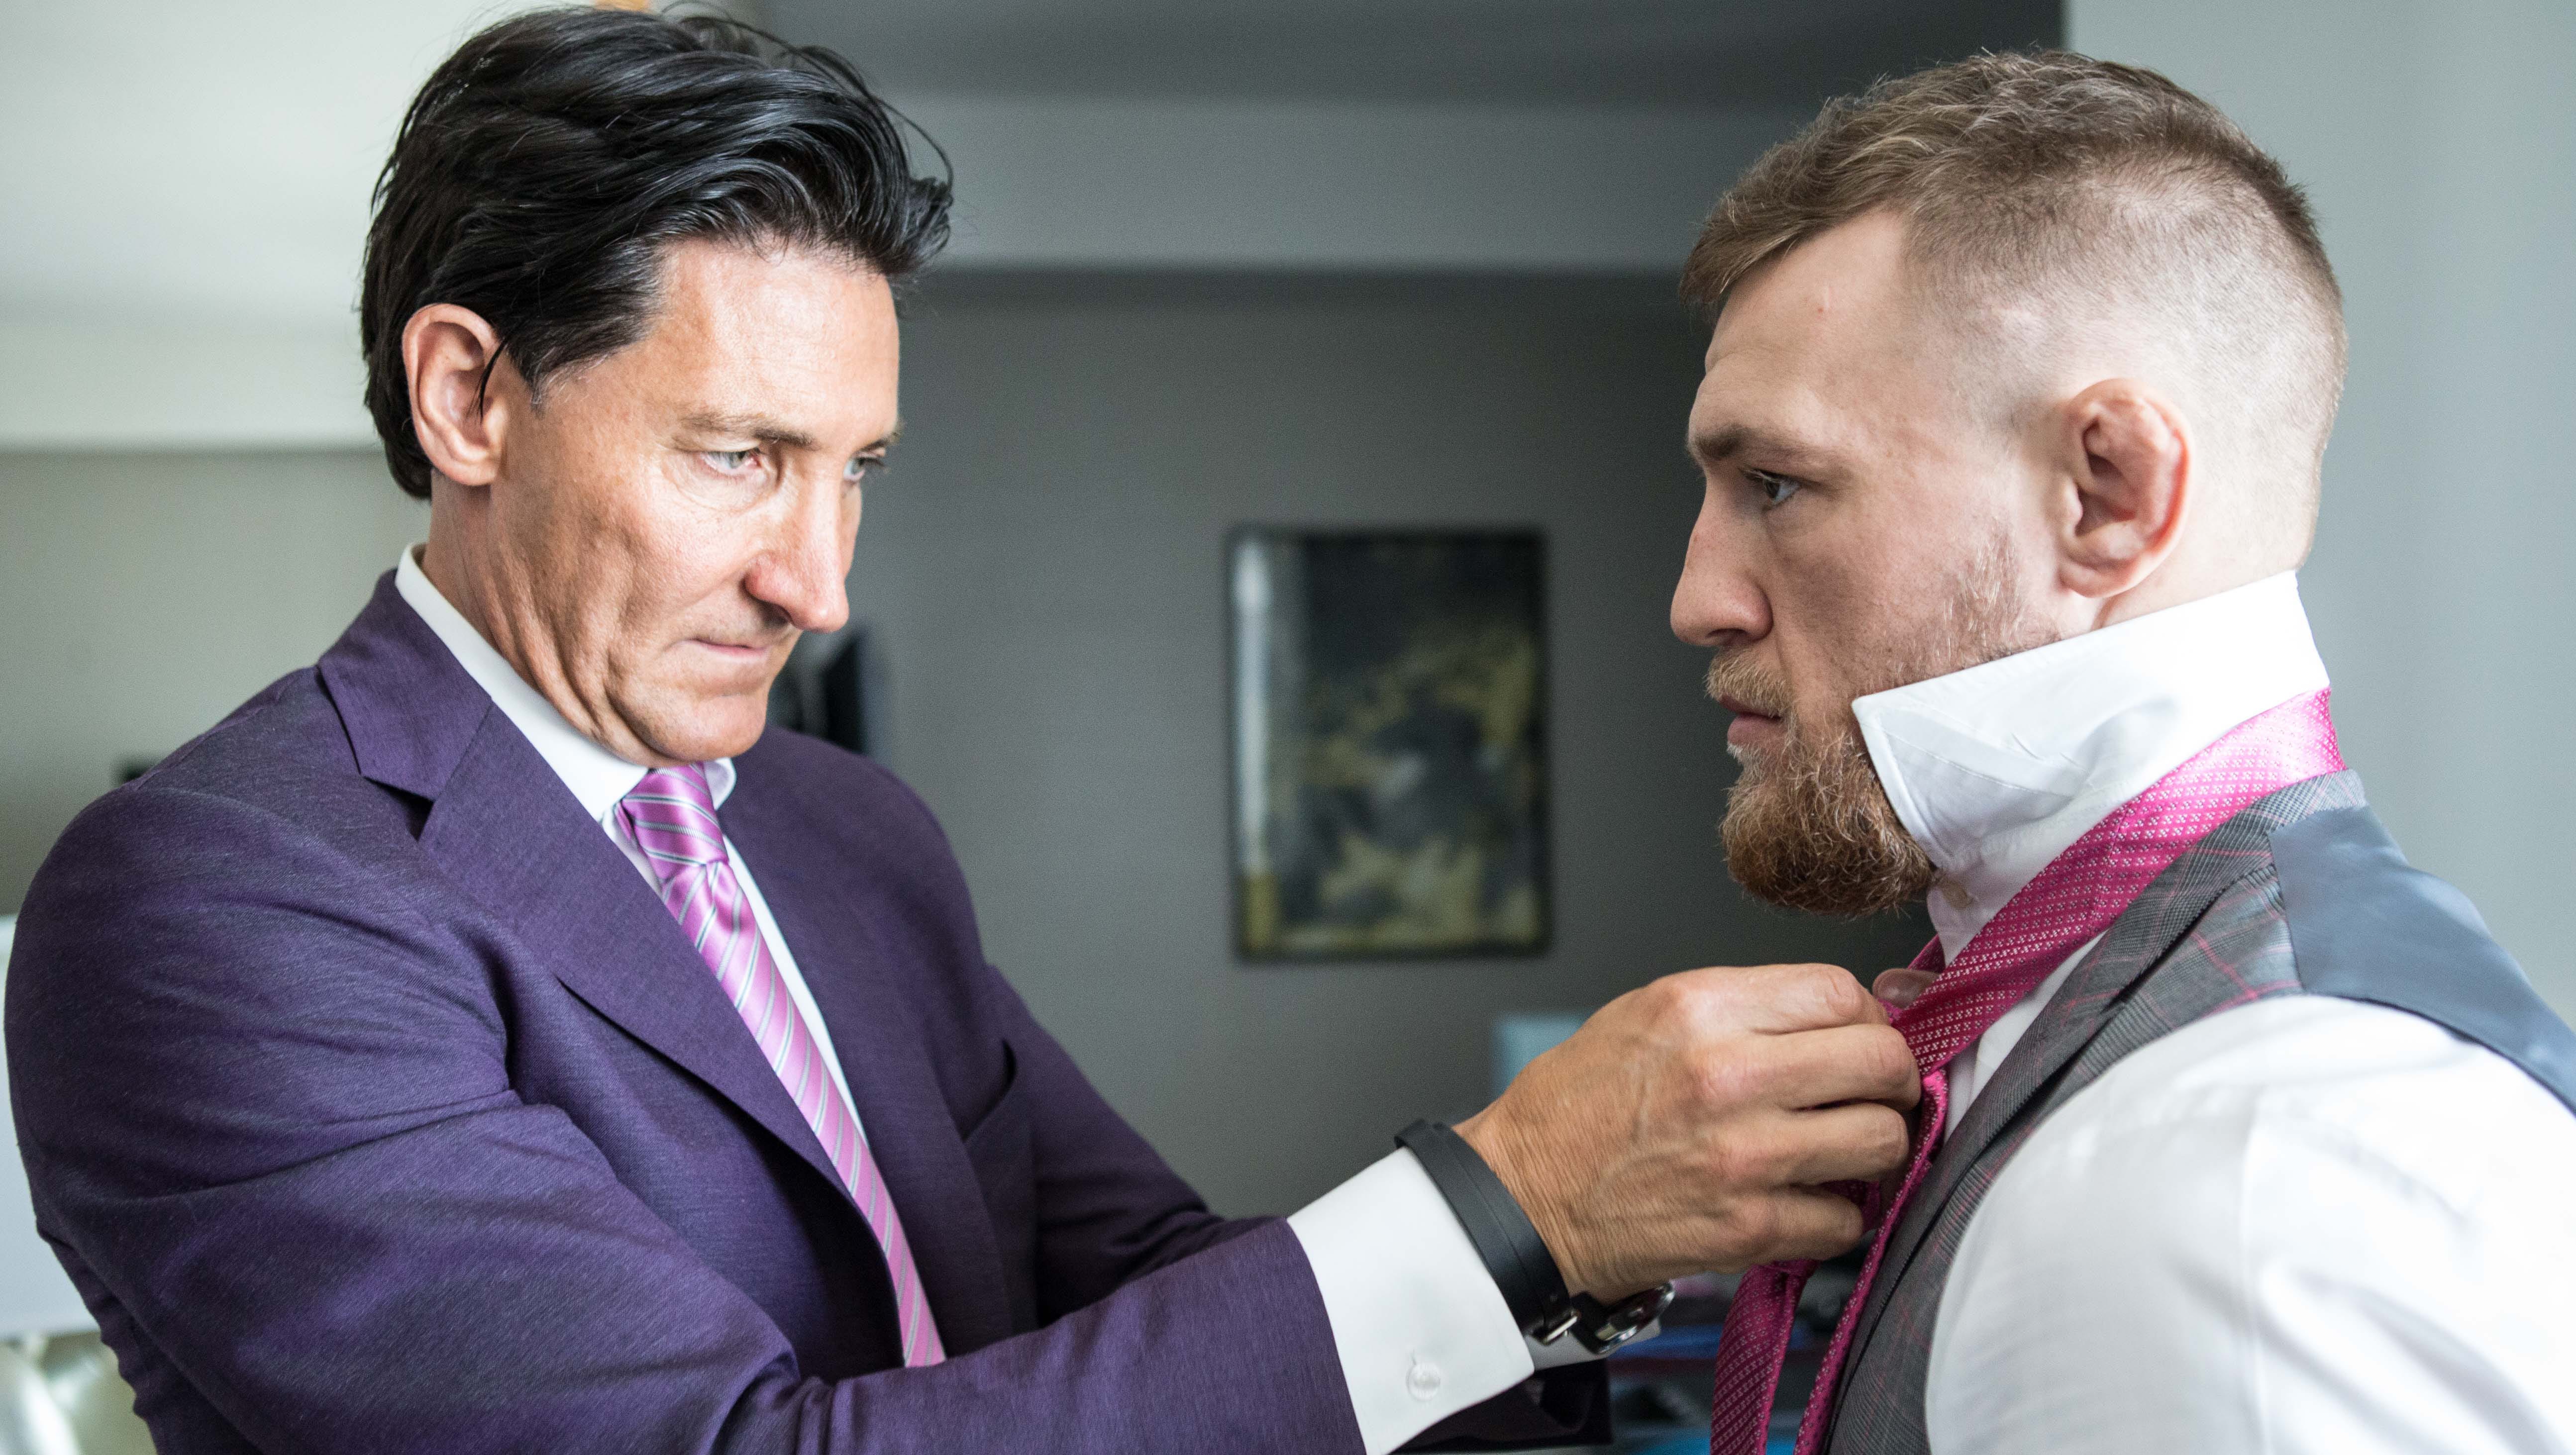 Conor McGregor dresses for success at this man's direction